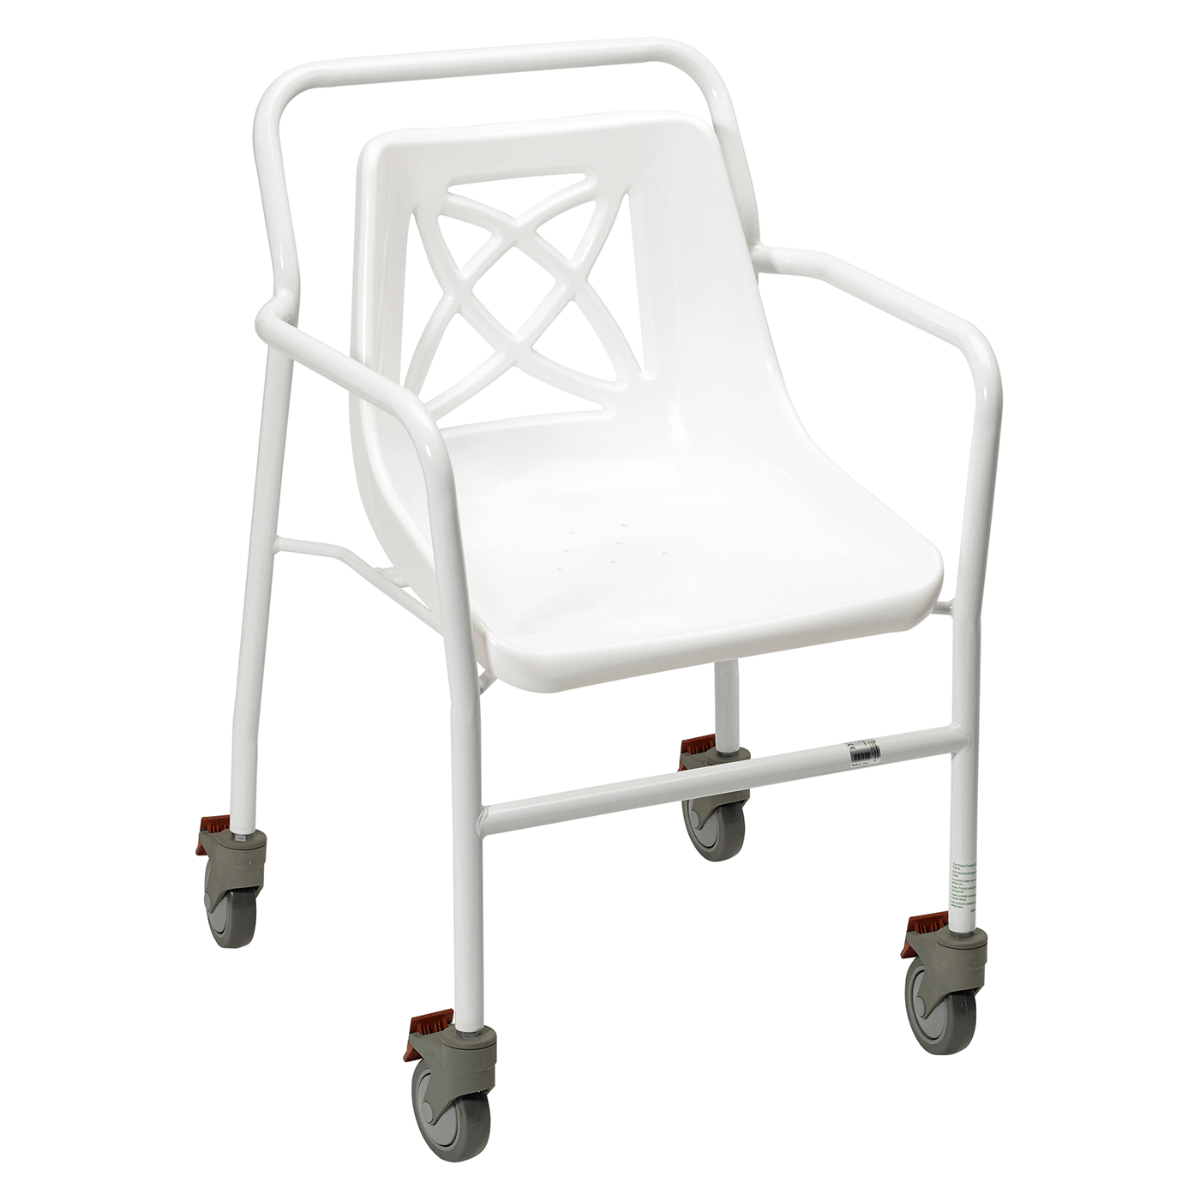 nonpadded shower chairs